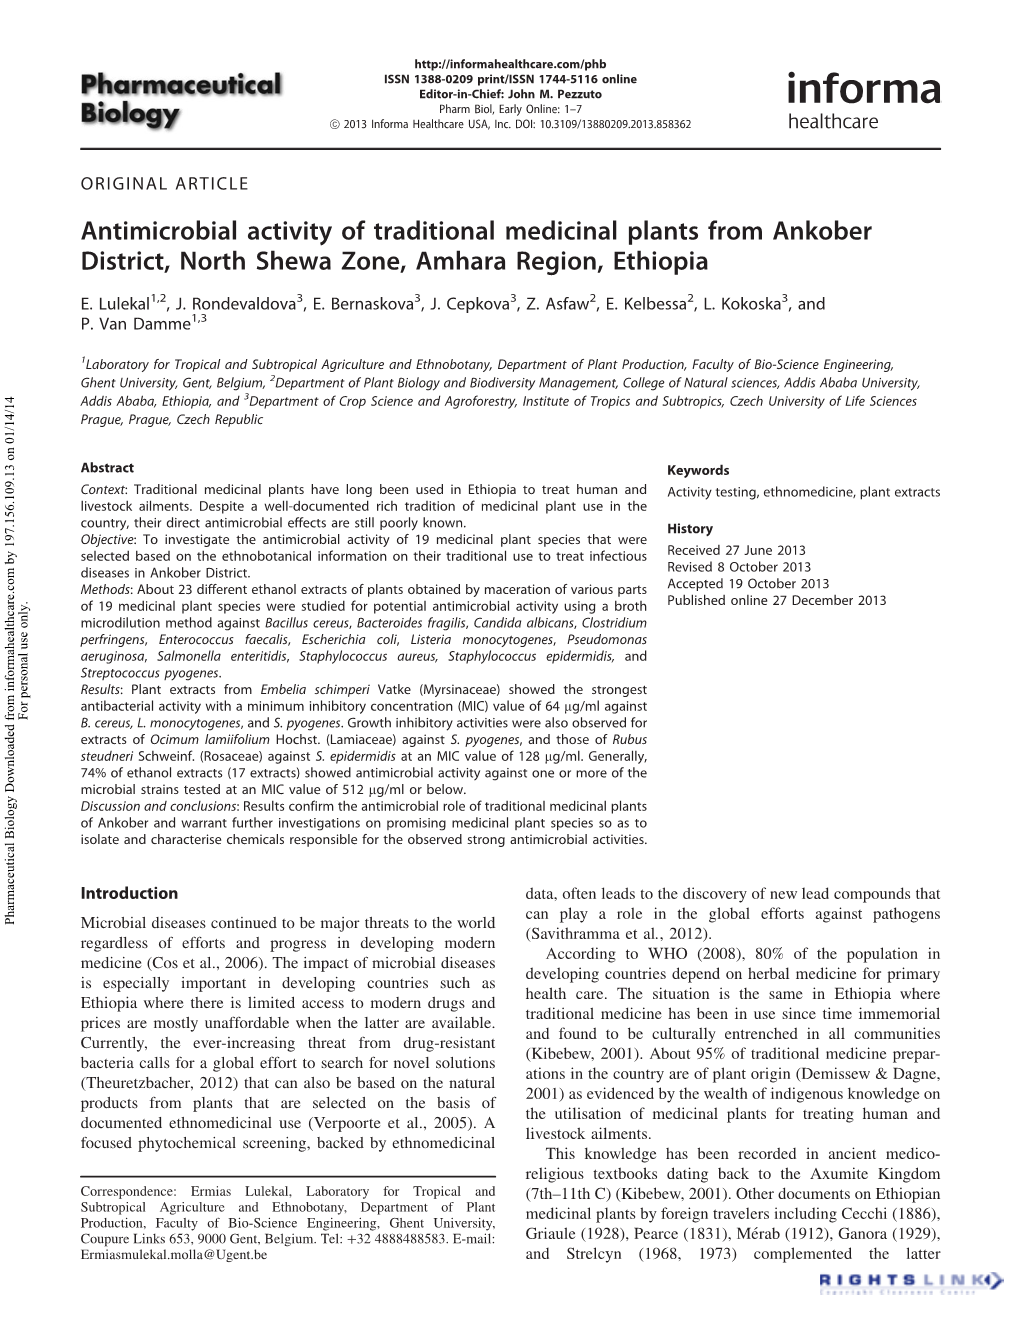 Antimicrobial Activity of Traditional Medicinal Plants from Ankober District, North Shewa Zone, Amhara Region, Ethiopia